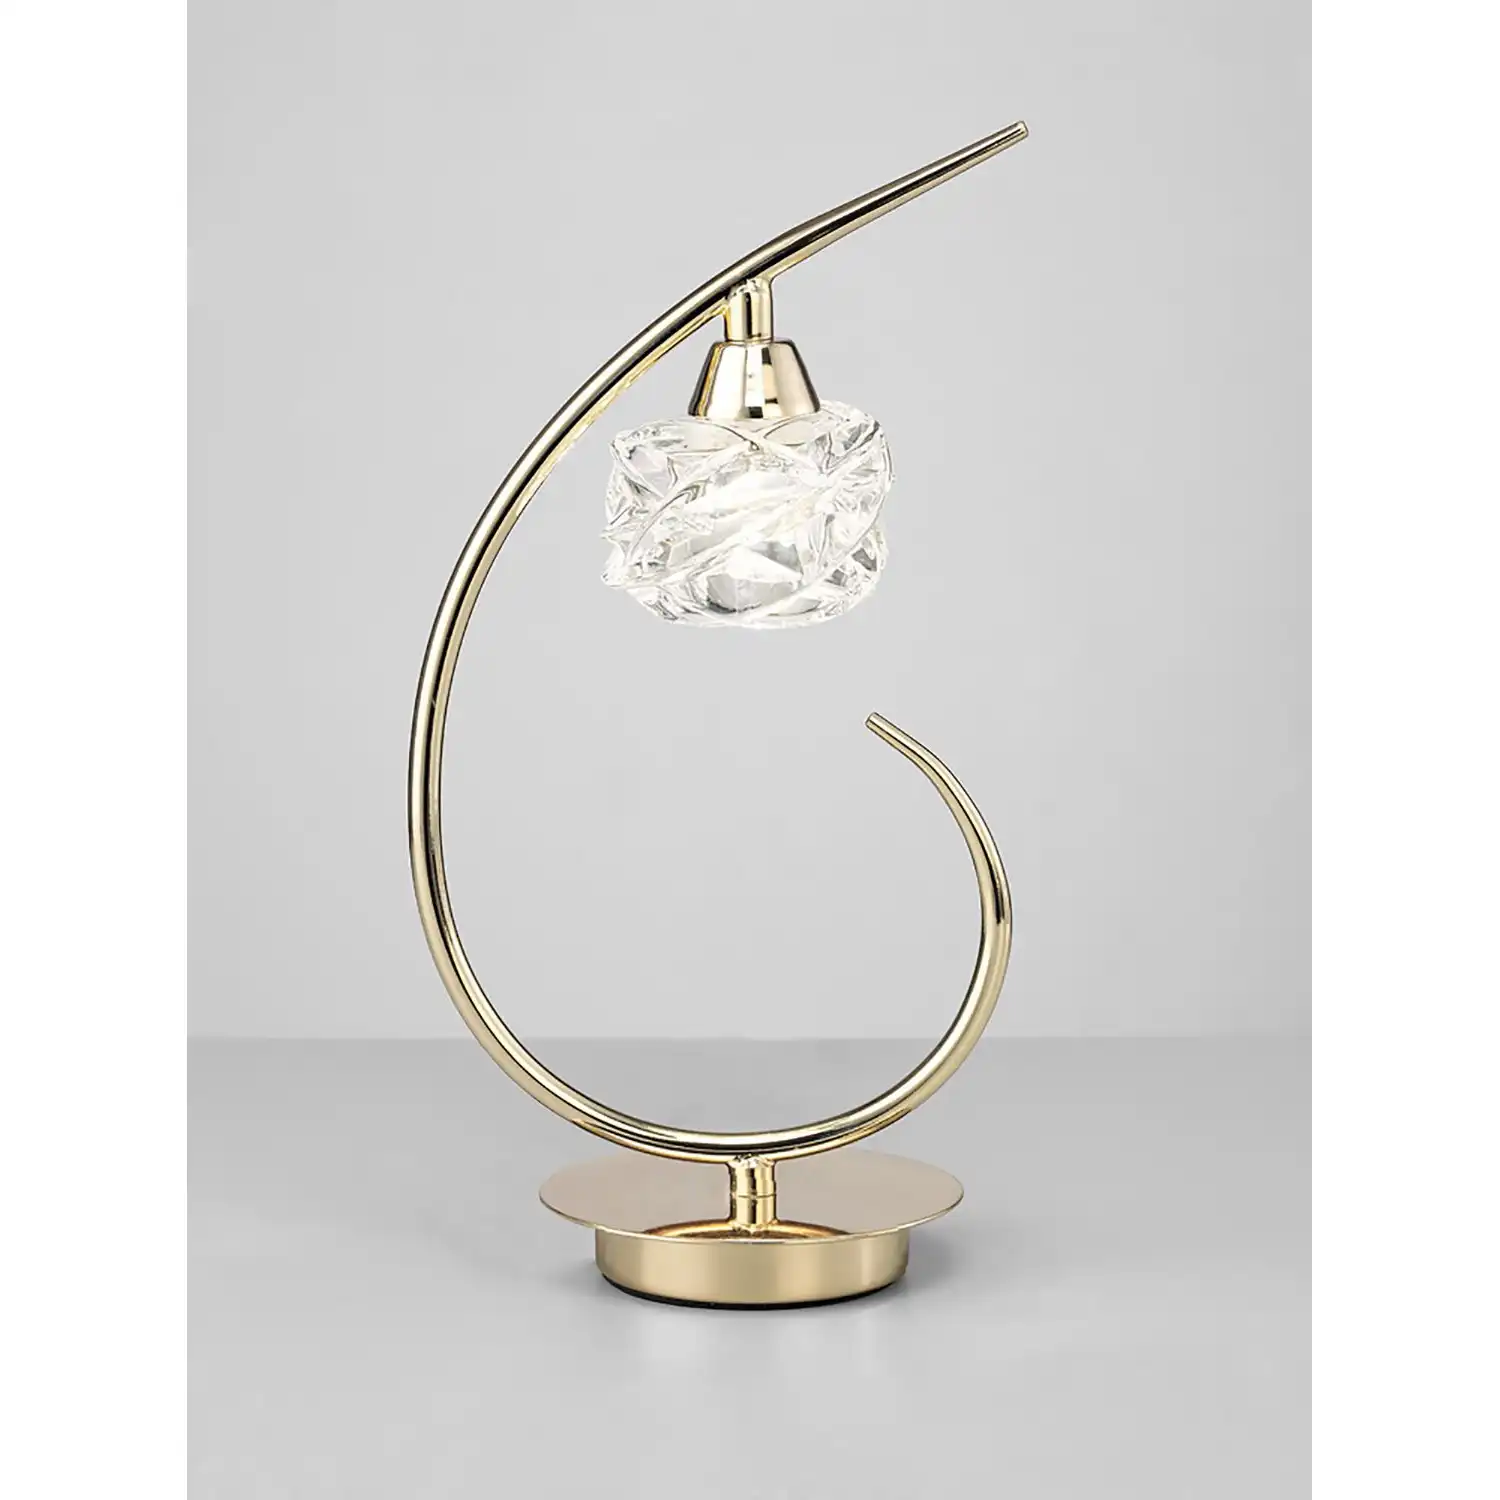 Maremagnum Table Lamp 1 Light G9, French Gold